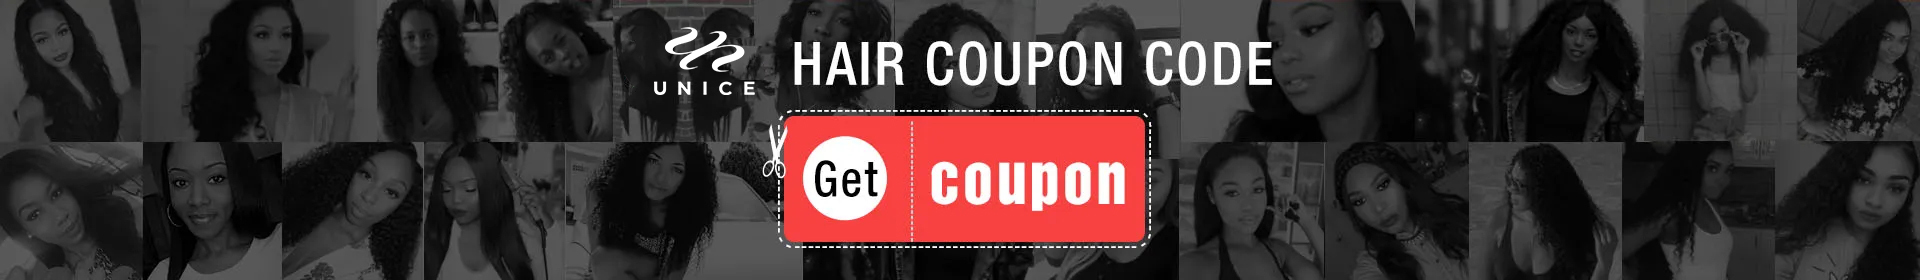 UNice Hair Coupon Codes